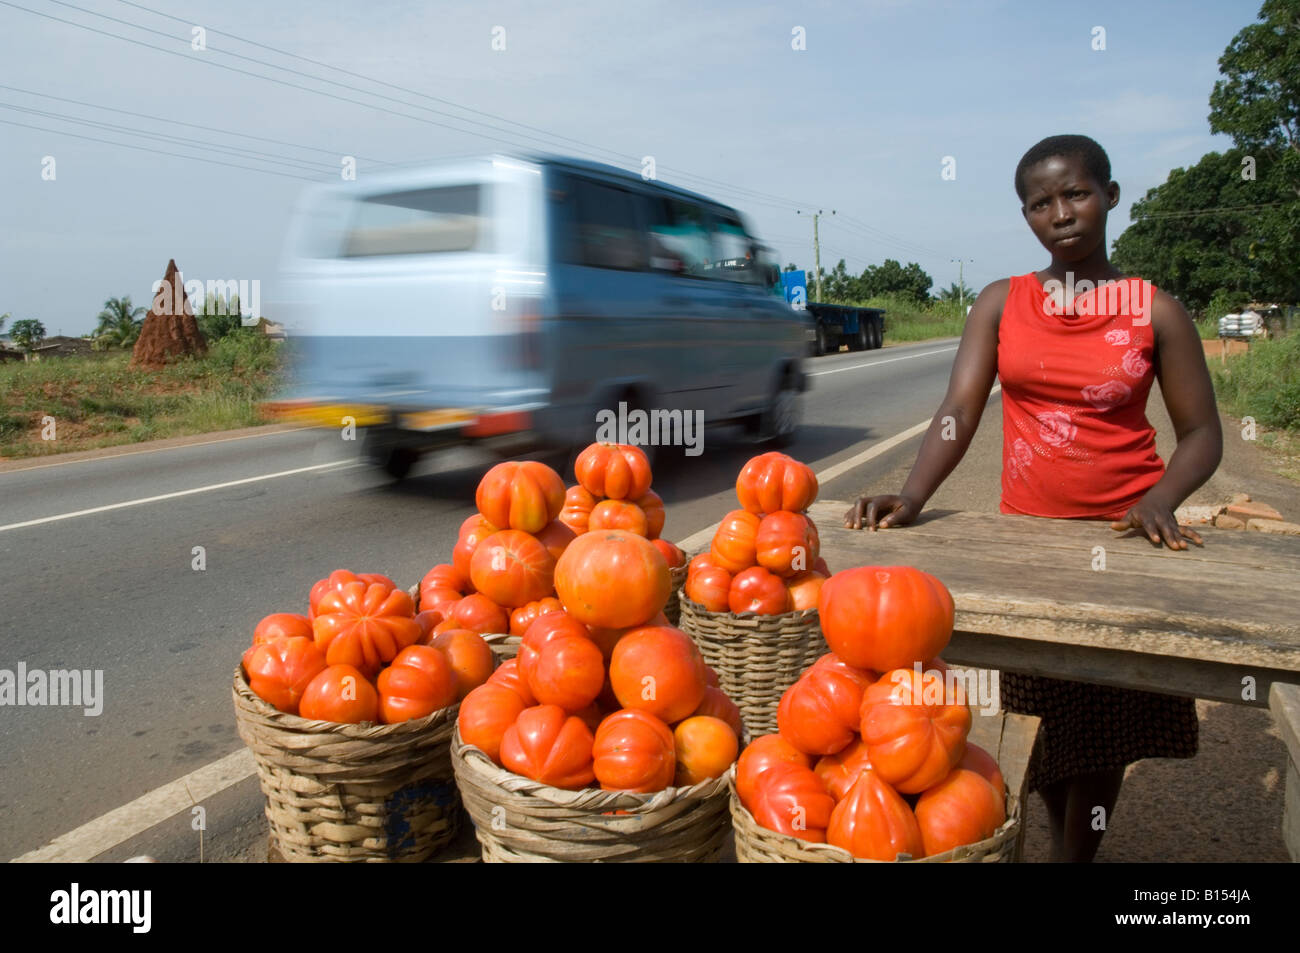 Wholesale traders called market queens control the transport and distribution of tomato, Kuluedor, Ghana Stock Photo